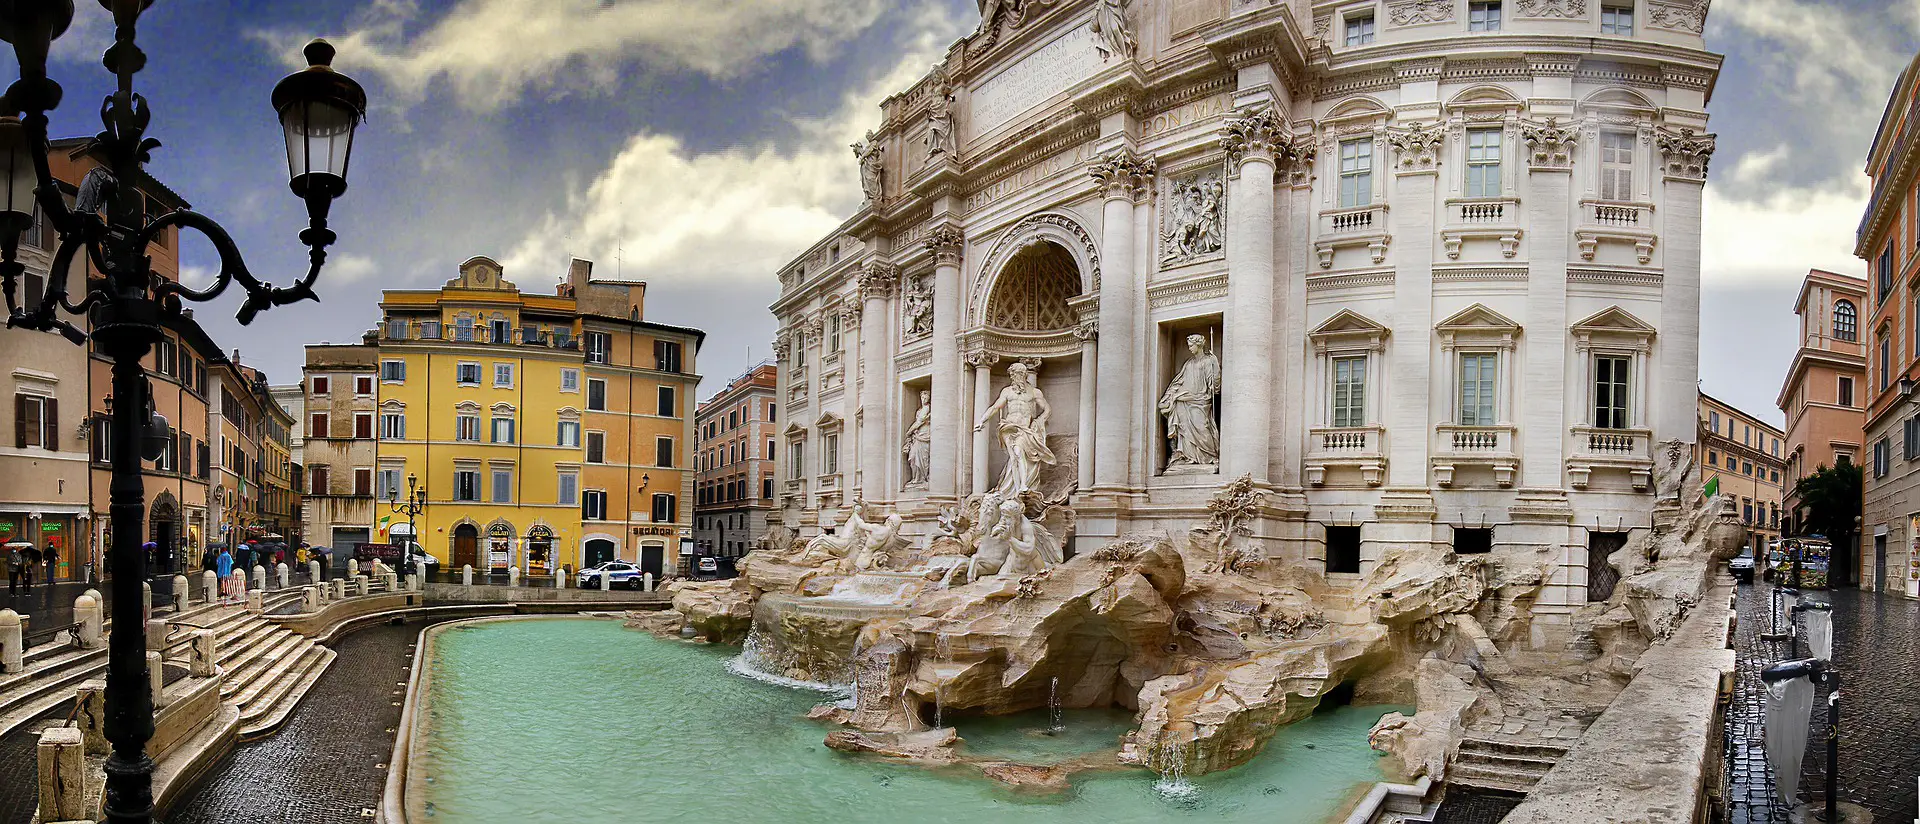 Making these mistakes could ruin your trip to Milan, Italy